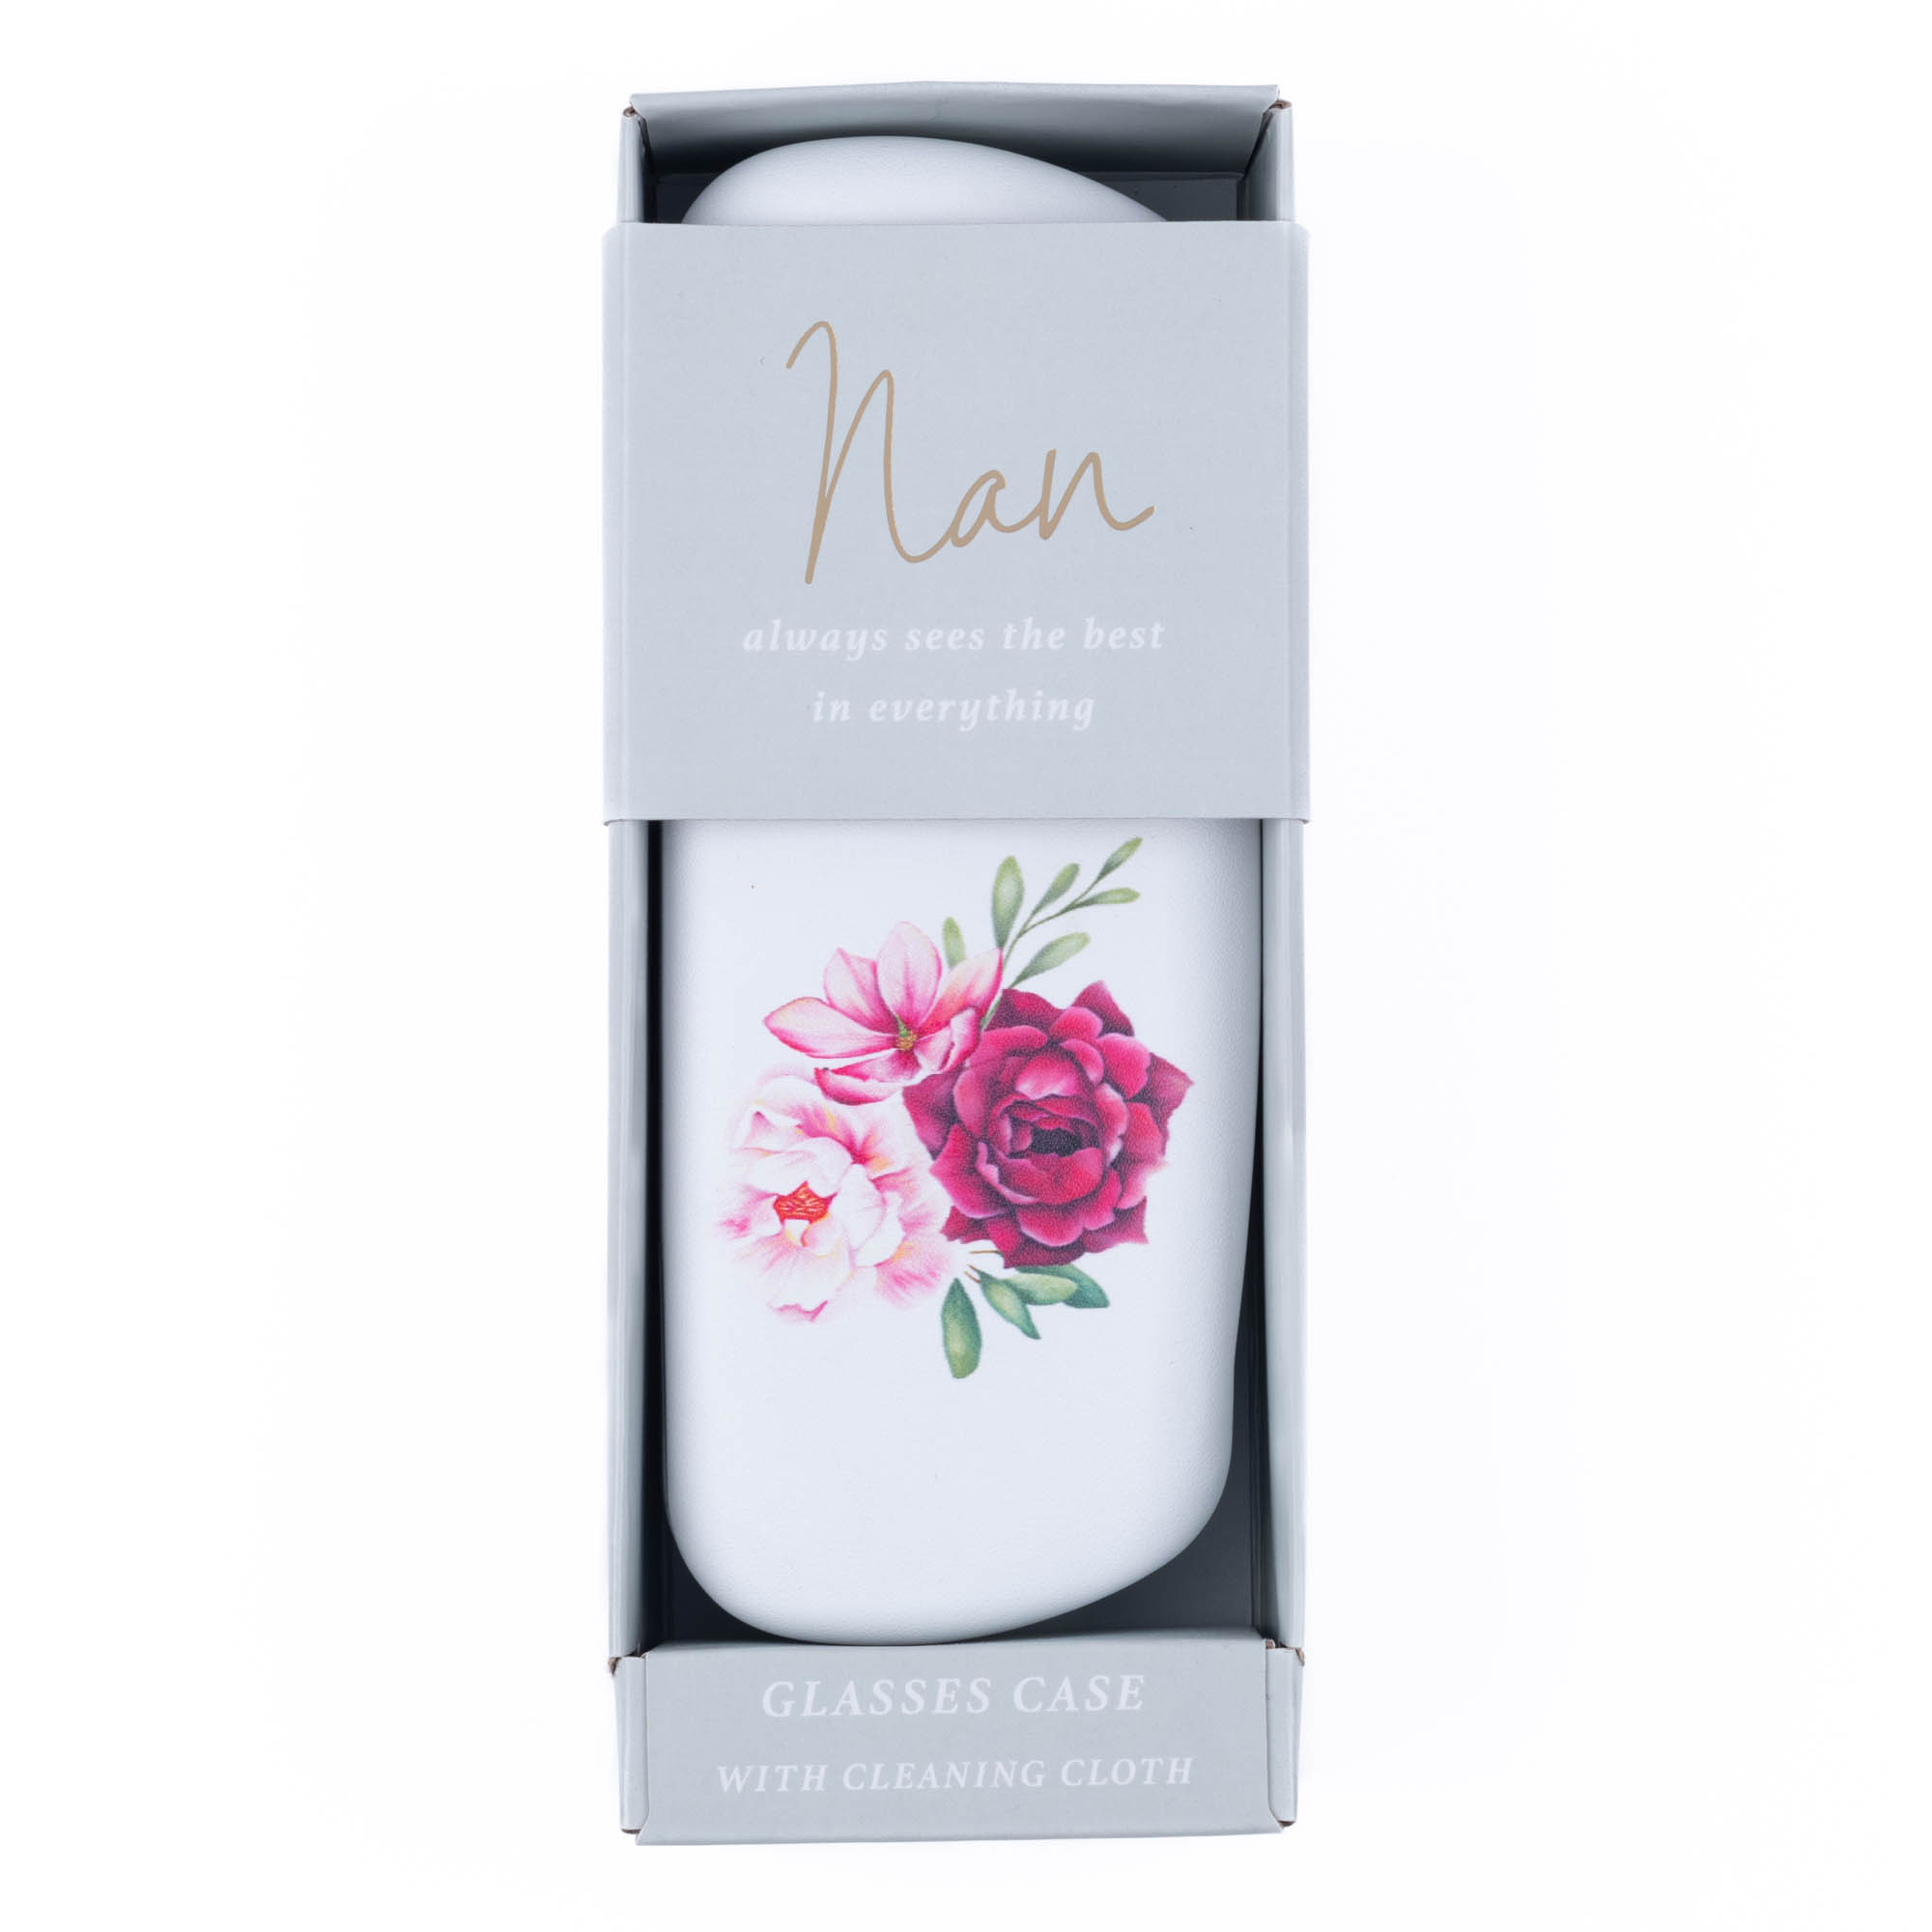 Nan Floral Glasses Case & Cleaning Cloth